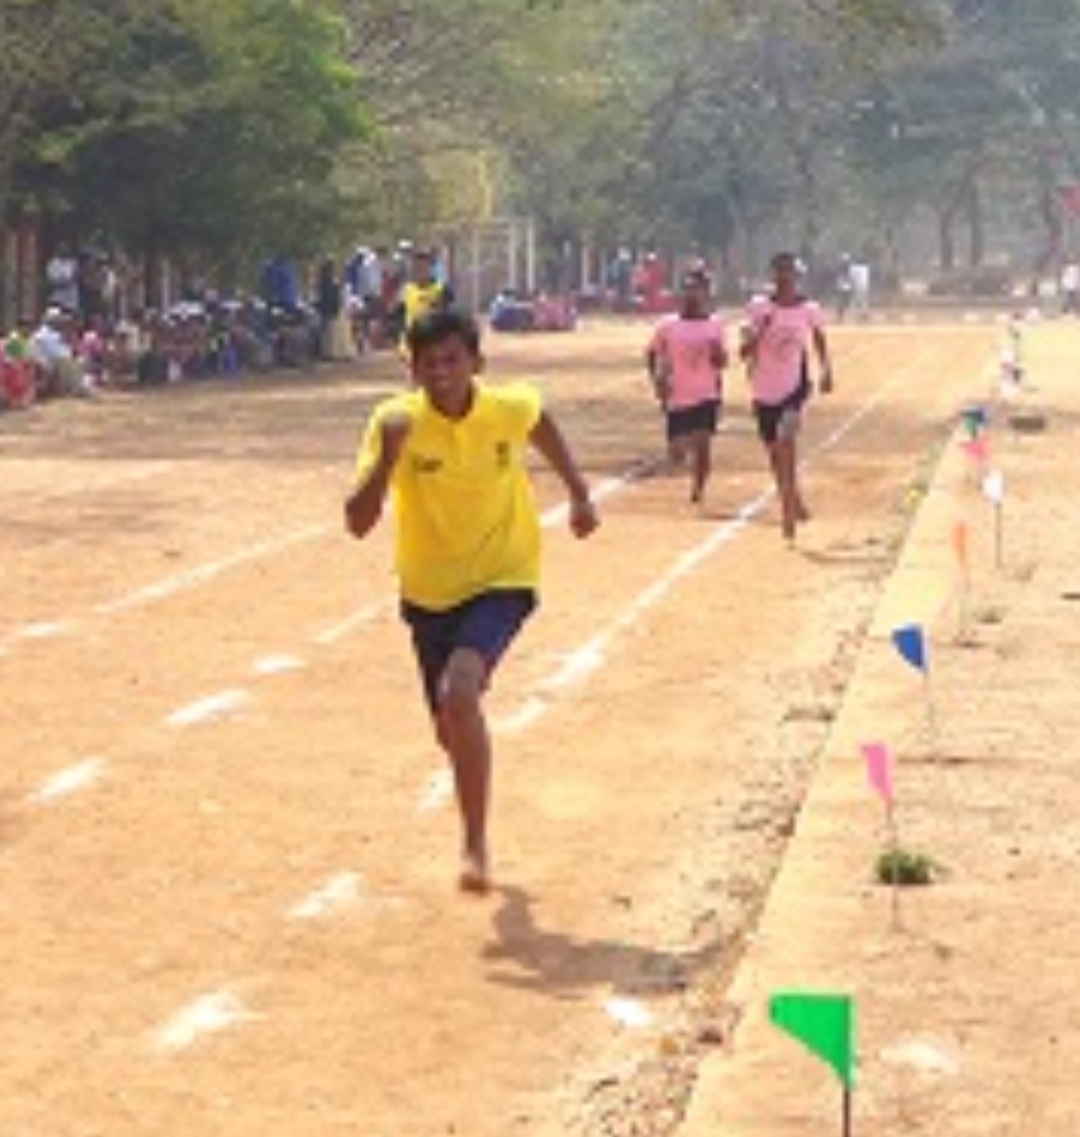 300 contestants participated in district level sports competition for disabled children